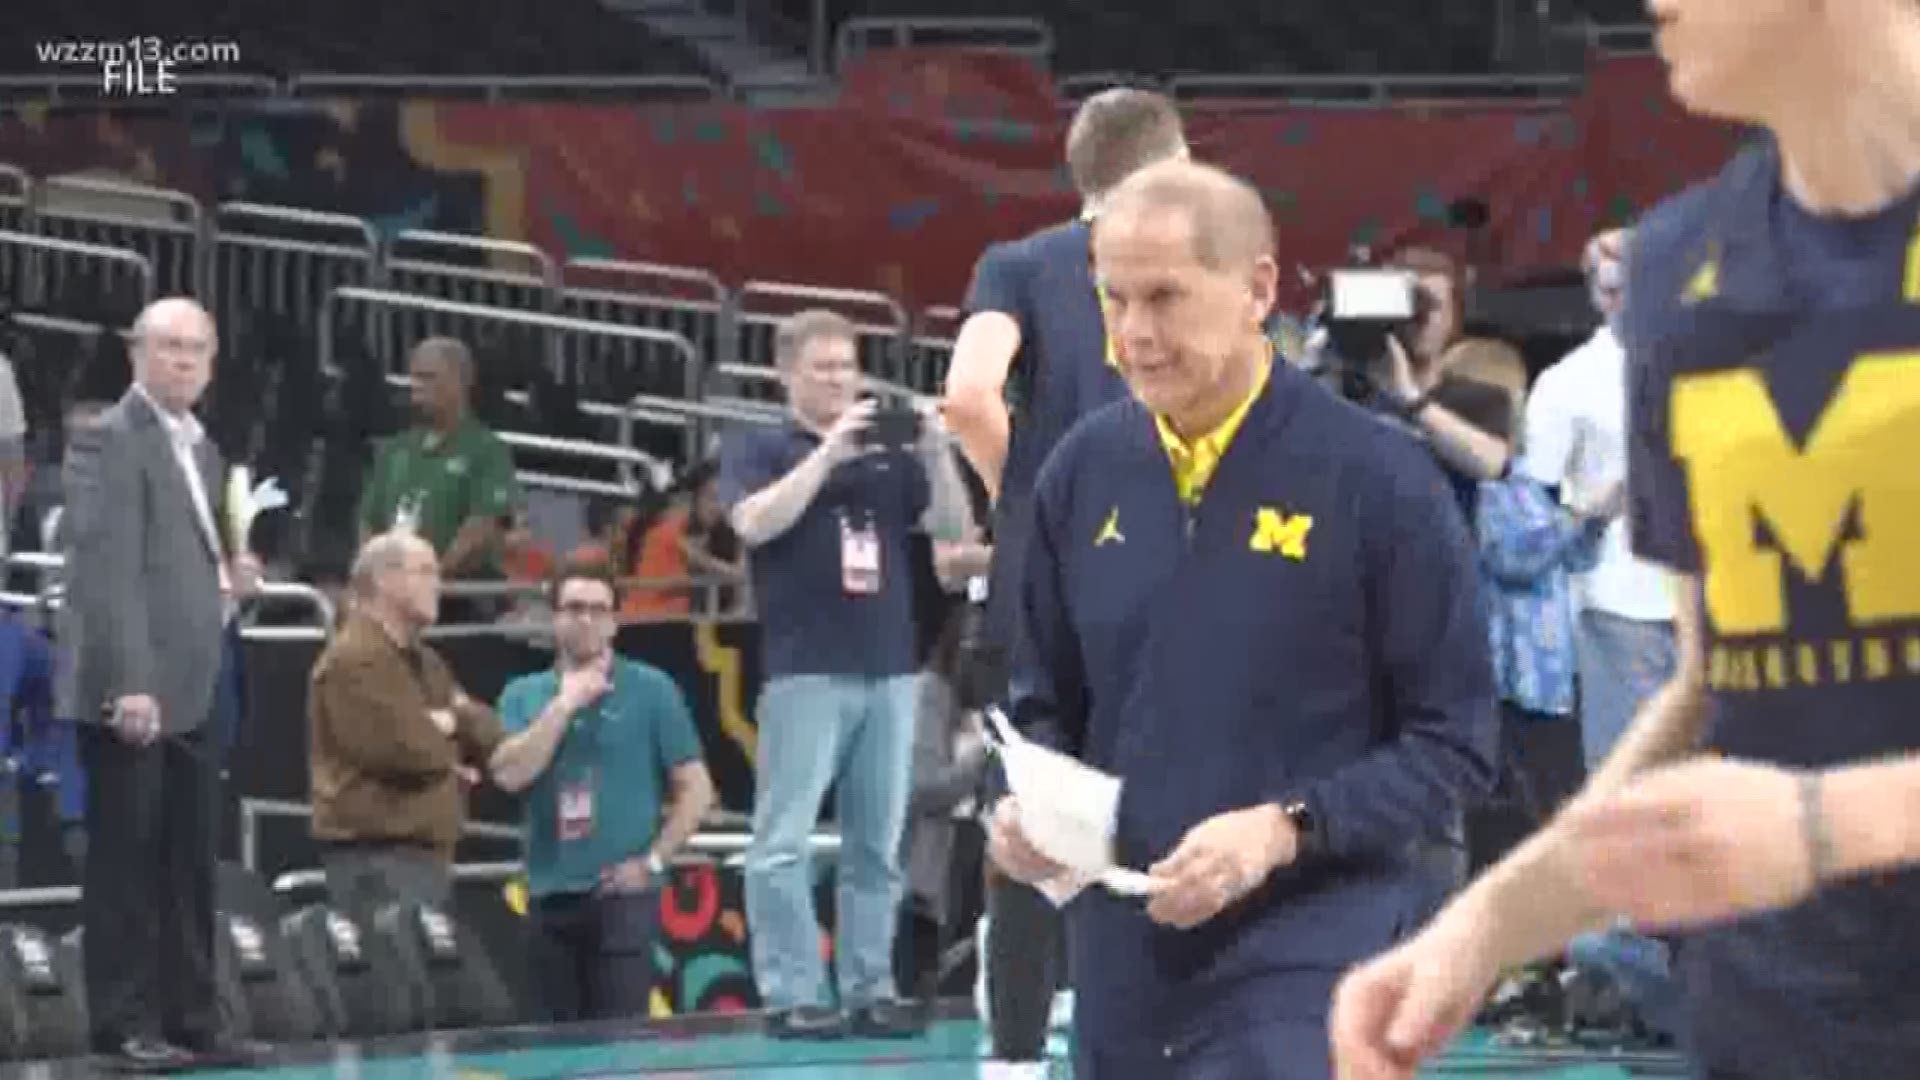 The Cleveland Cavaliers have hired Michigan's John Beilein to be their new head coach.